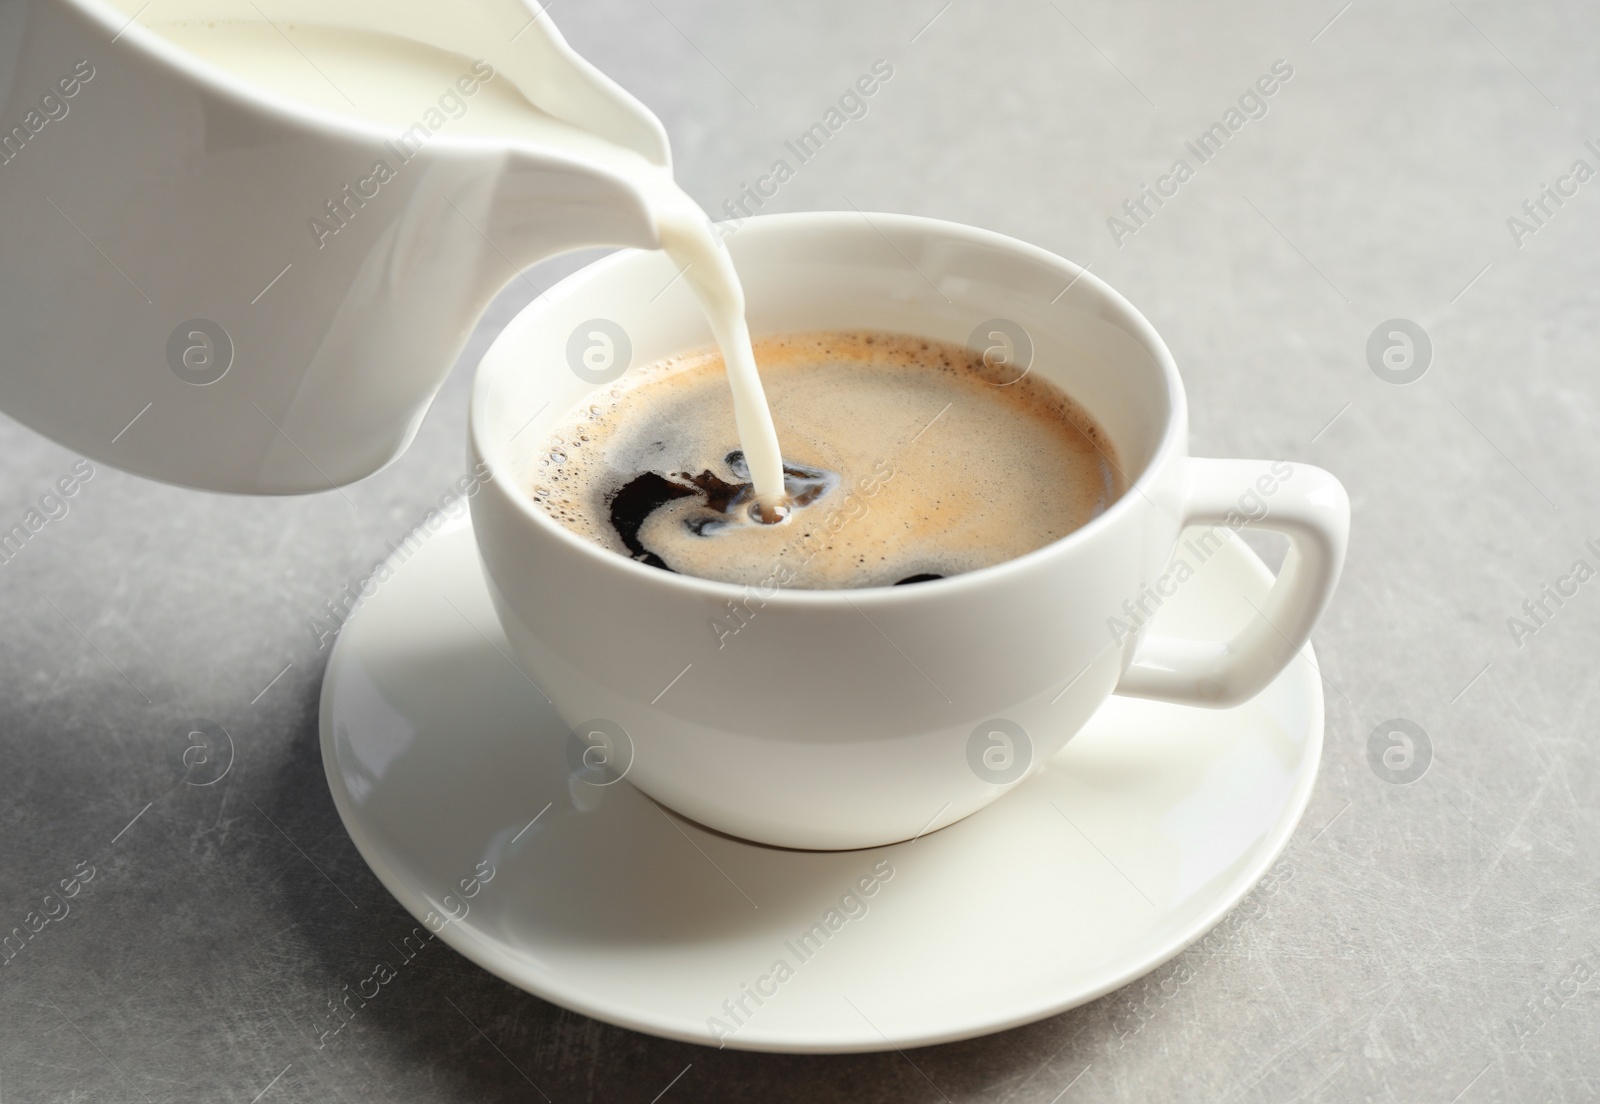 Photo of Pouring milk into cup of hot coffee on grey table